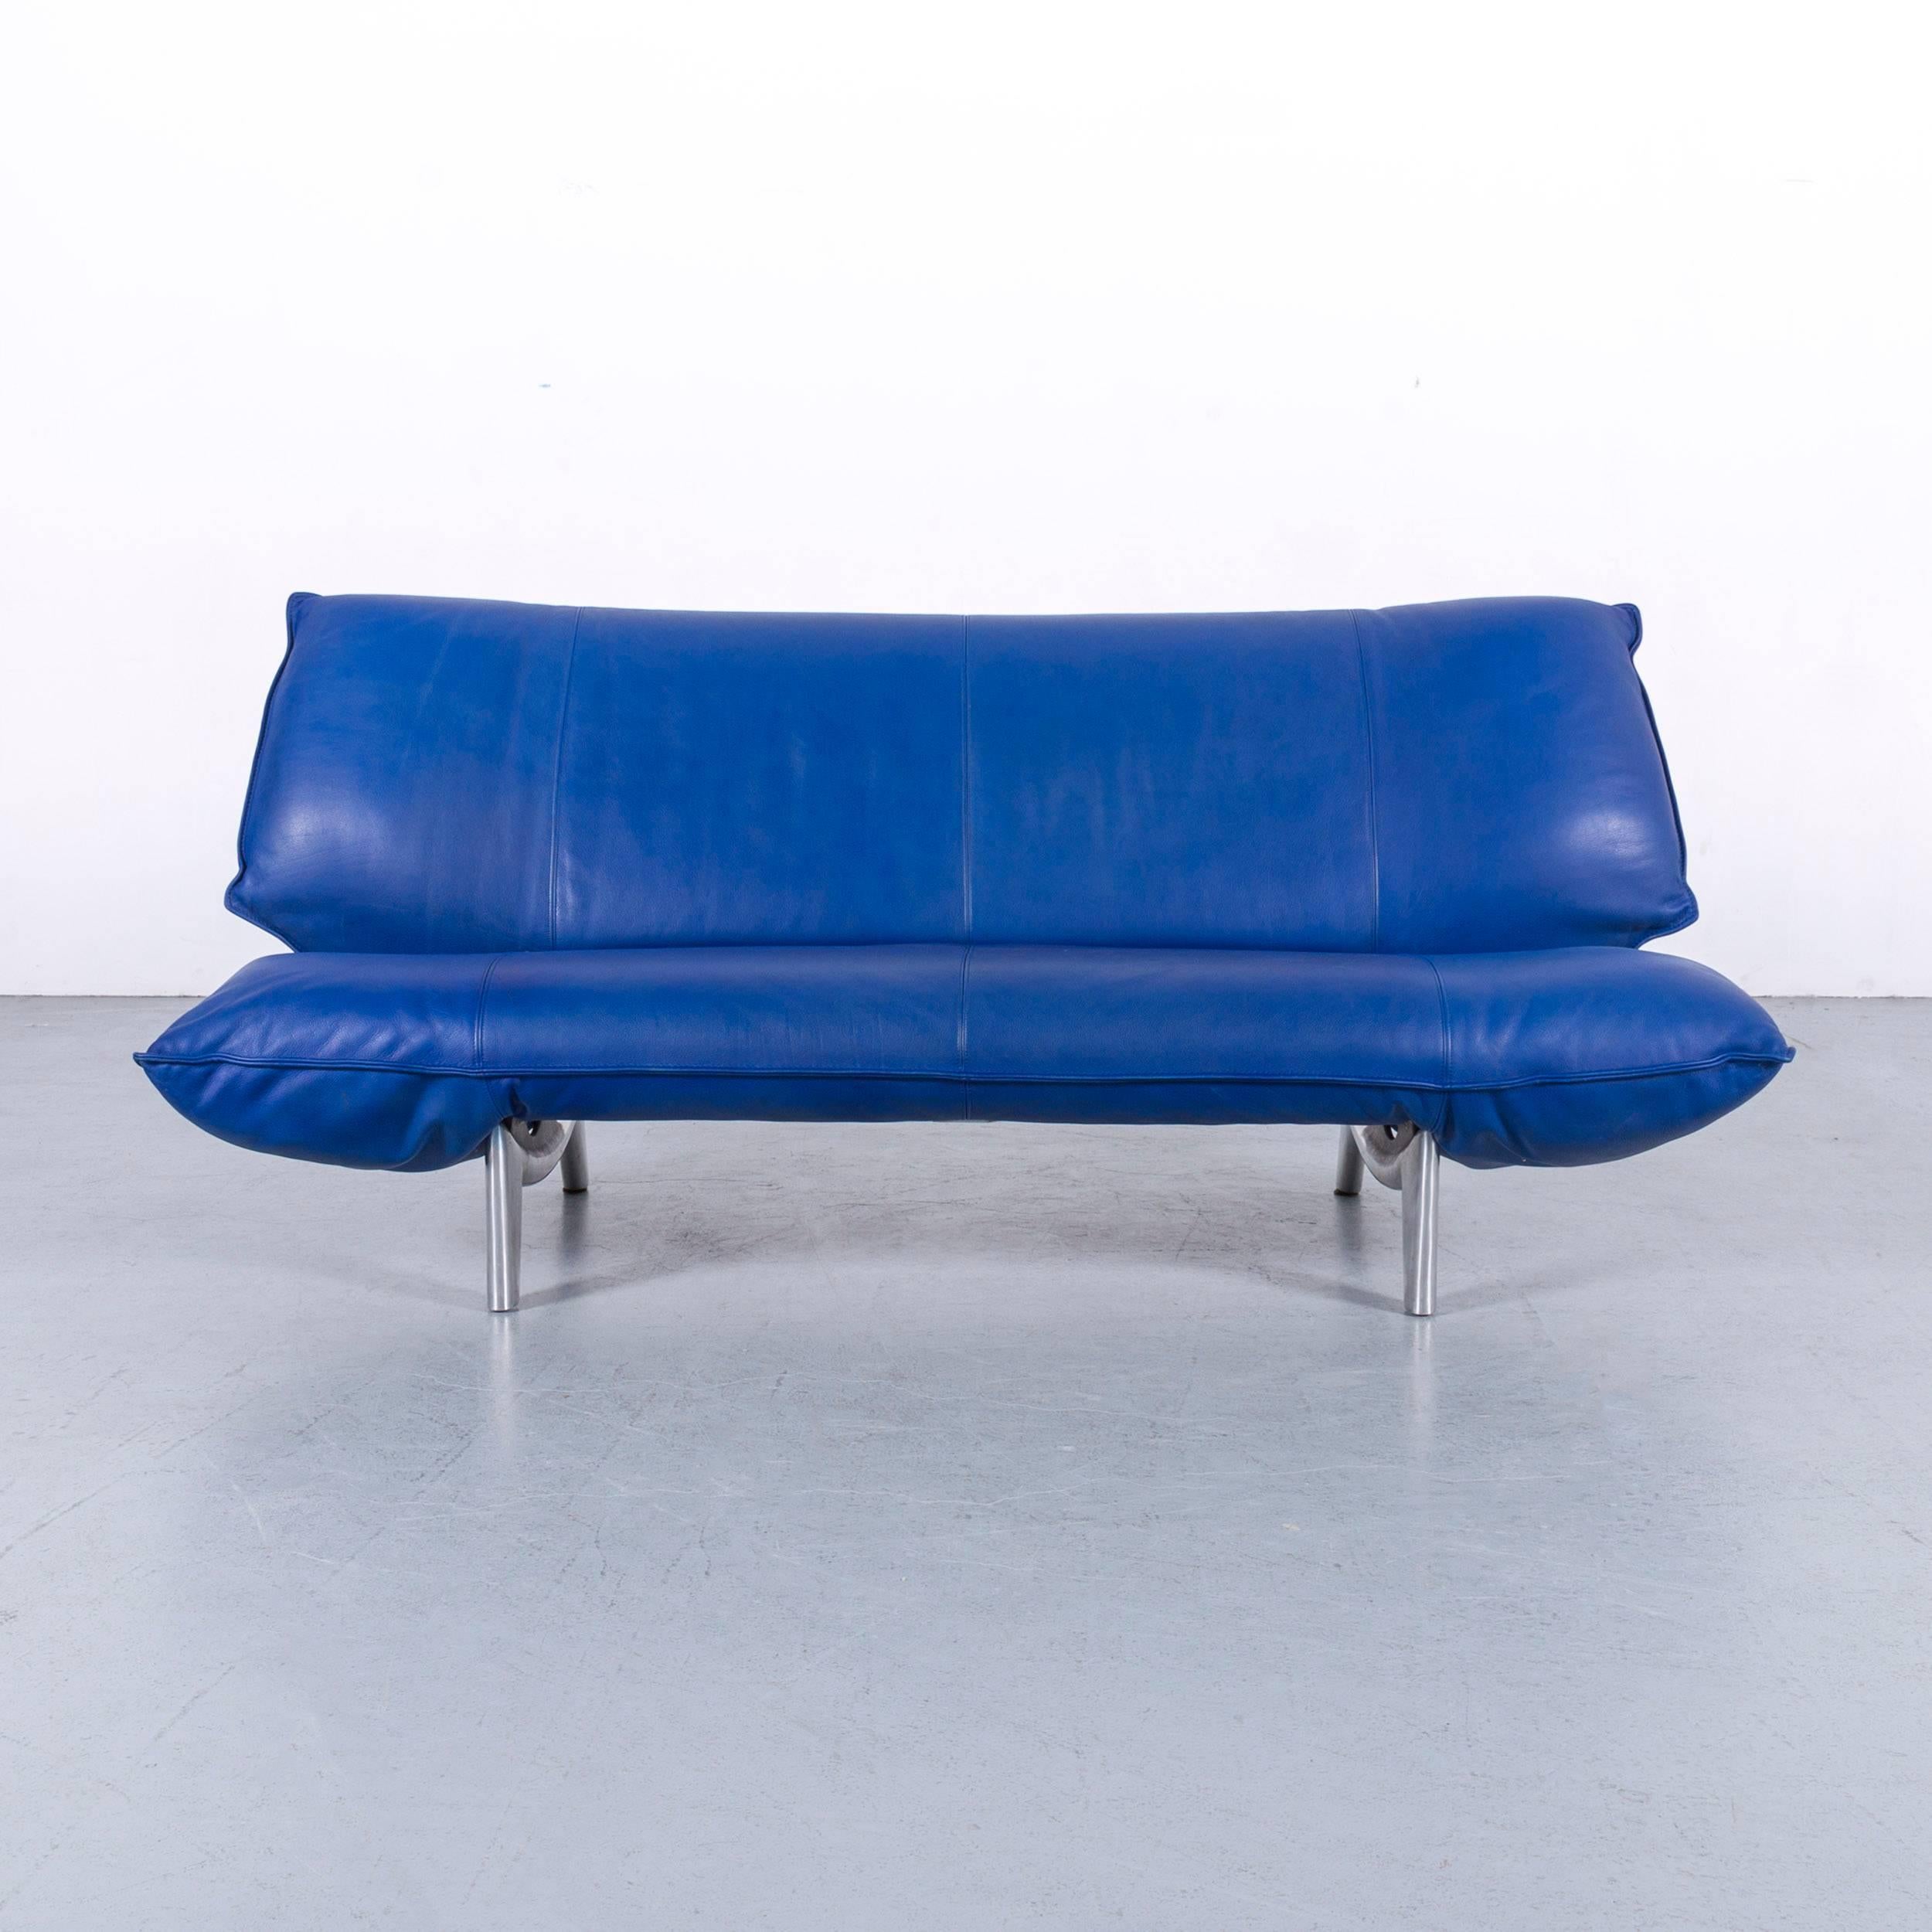 We bring to you an Leolux Tango designer sofa leather blue two-seat couch modern.